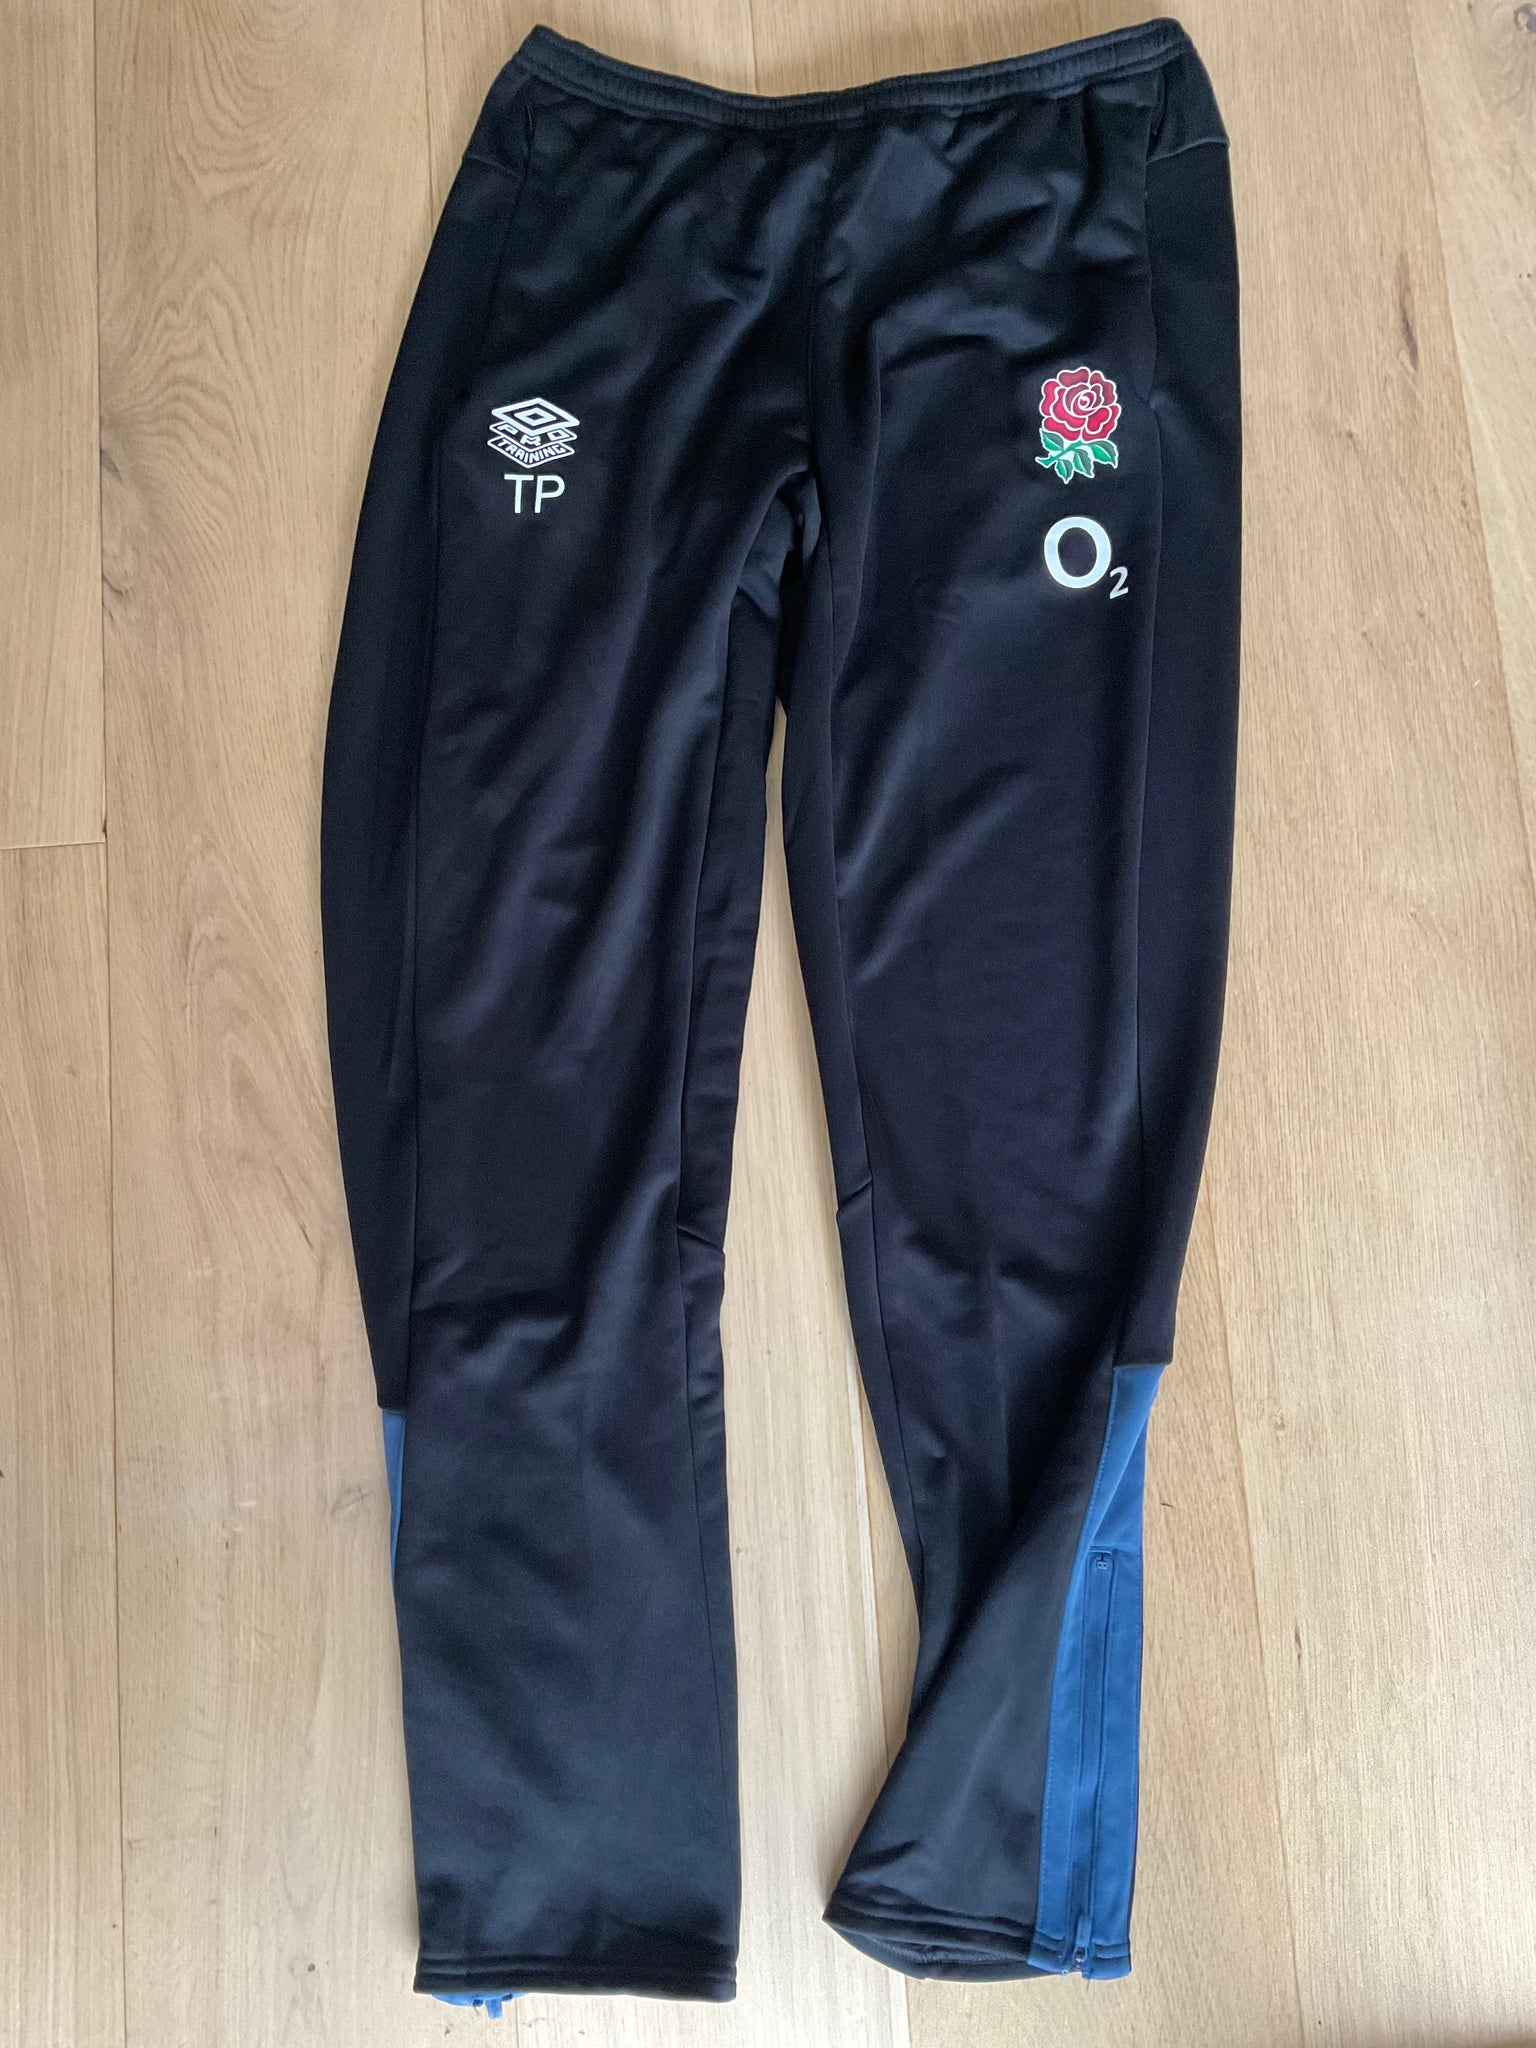 Tom Pearson - England Rugby Tapered Pants [Black with Blue]